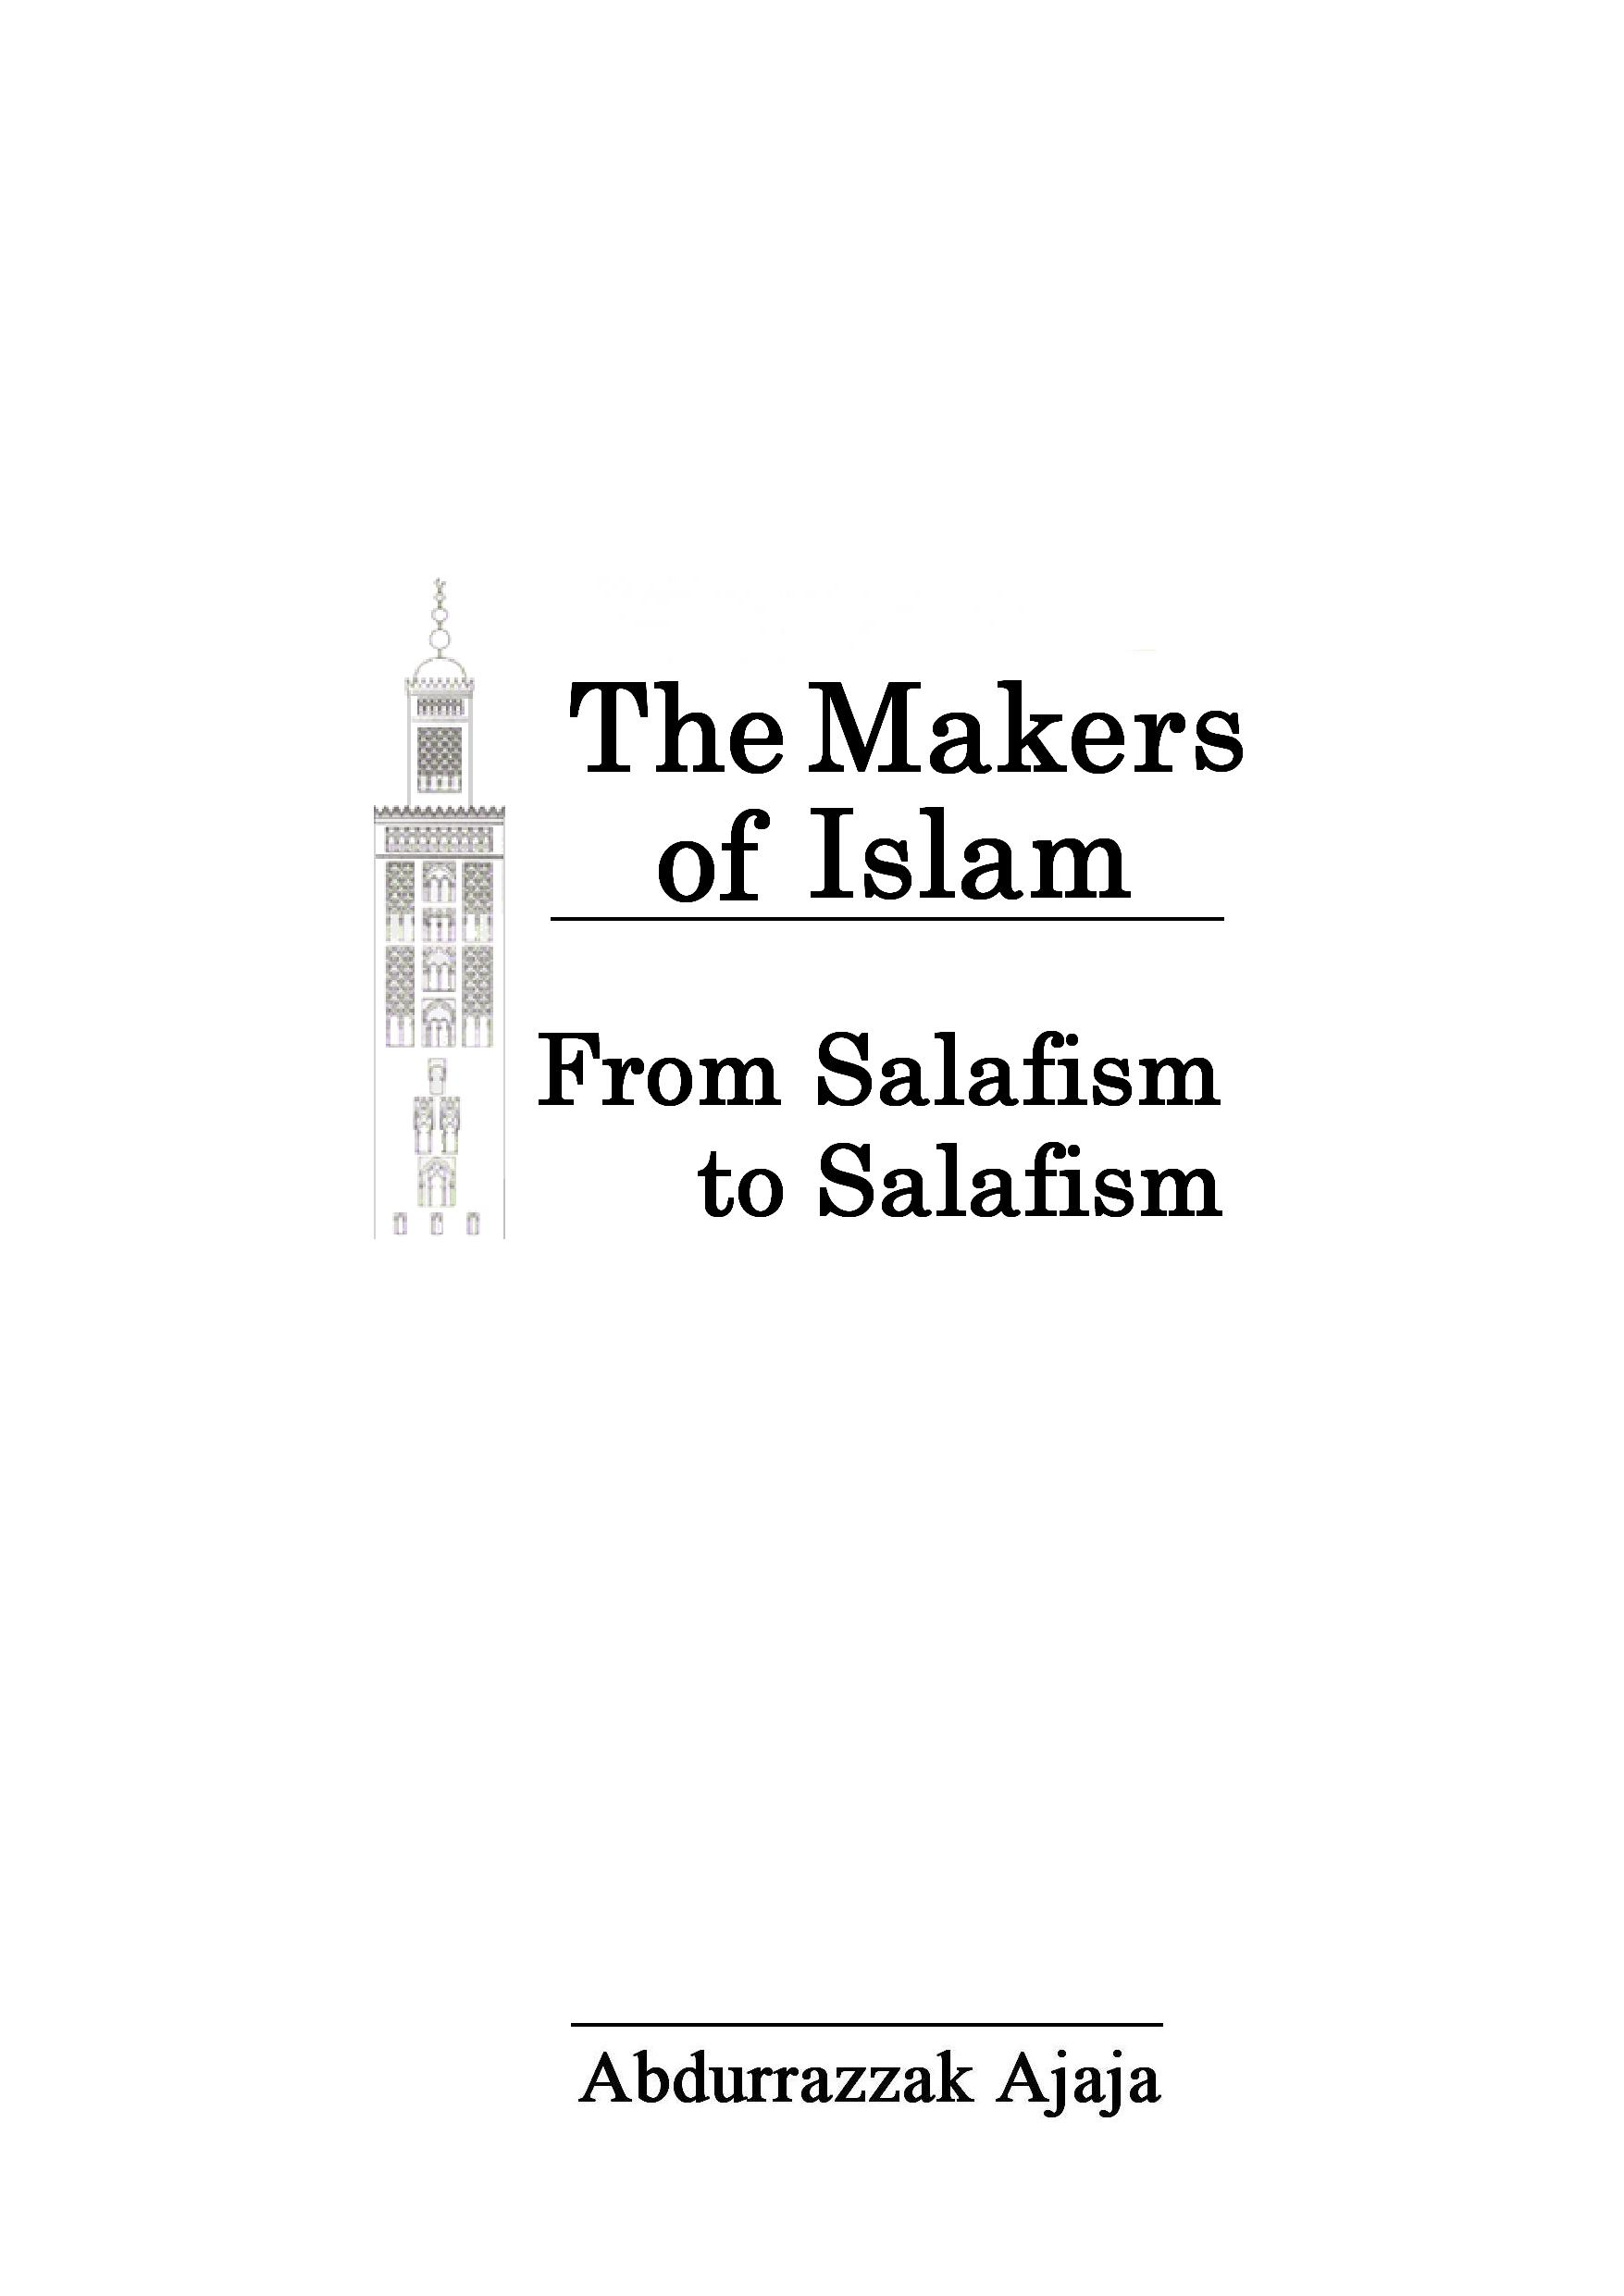 The Makers of Islam